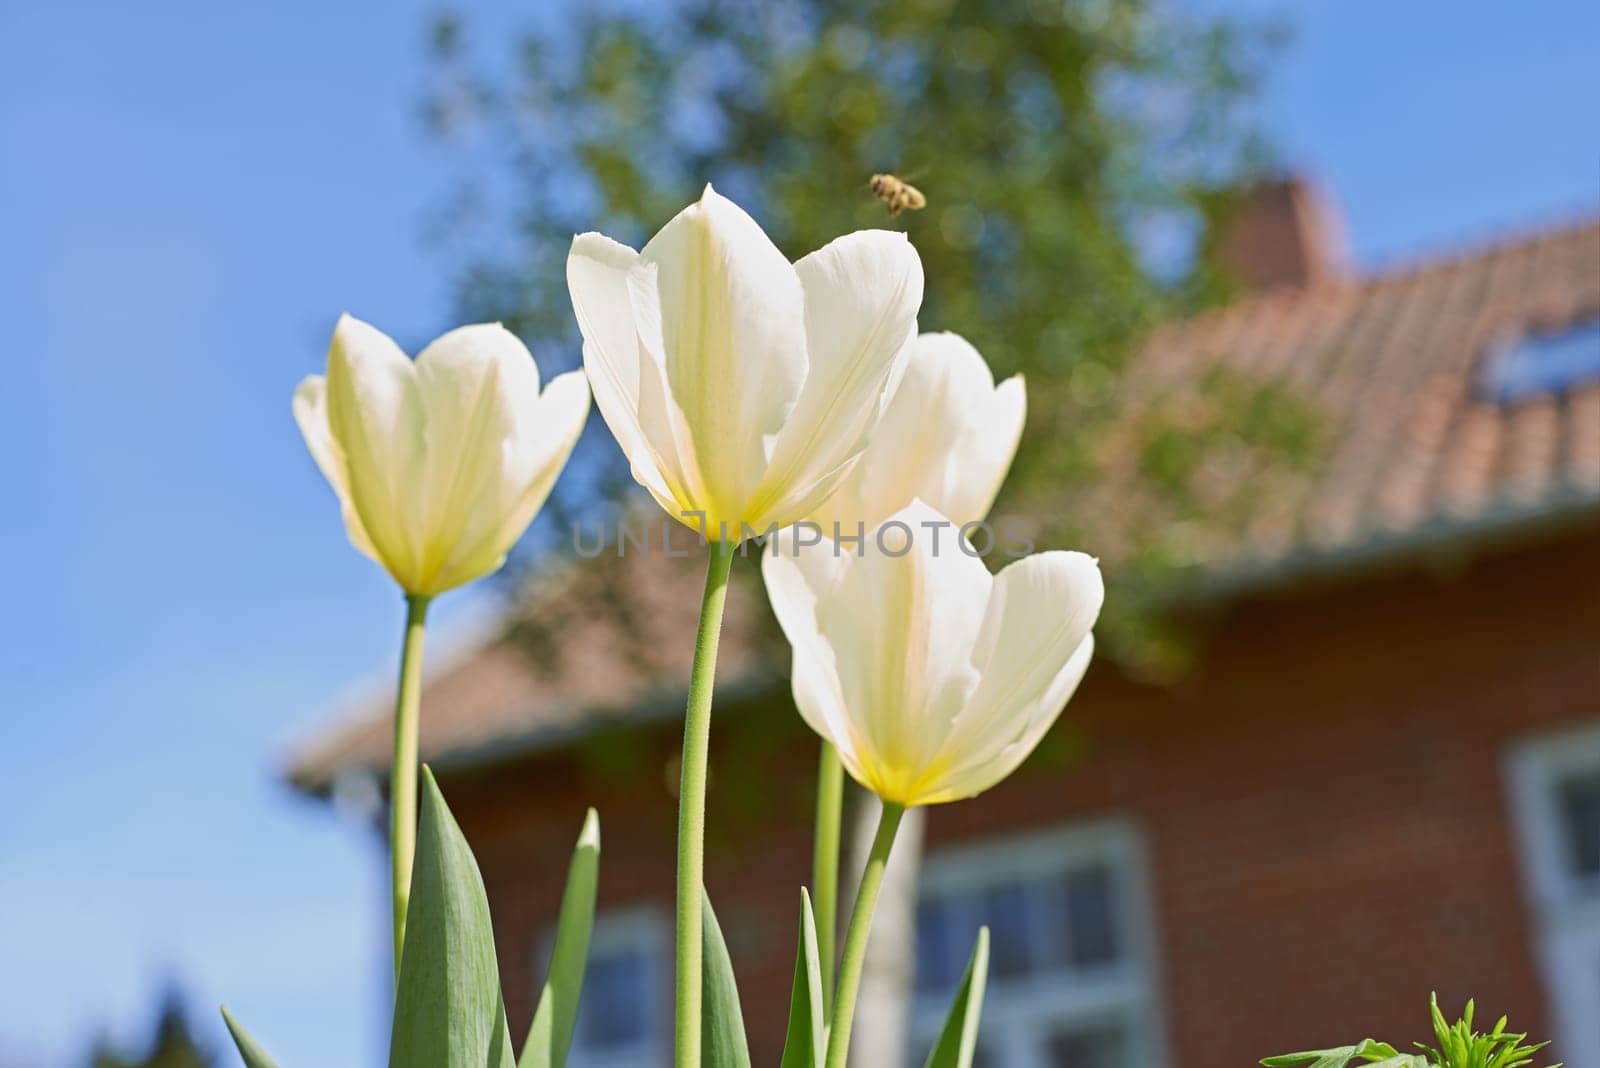 Flowers, tulips and garden outdoor by house, blossom and peace or floral field. Plant, petal and growth in countryside or landscape, ecosystem and botany for sustainable environment or nature in farm.